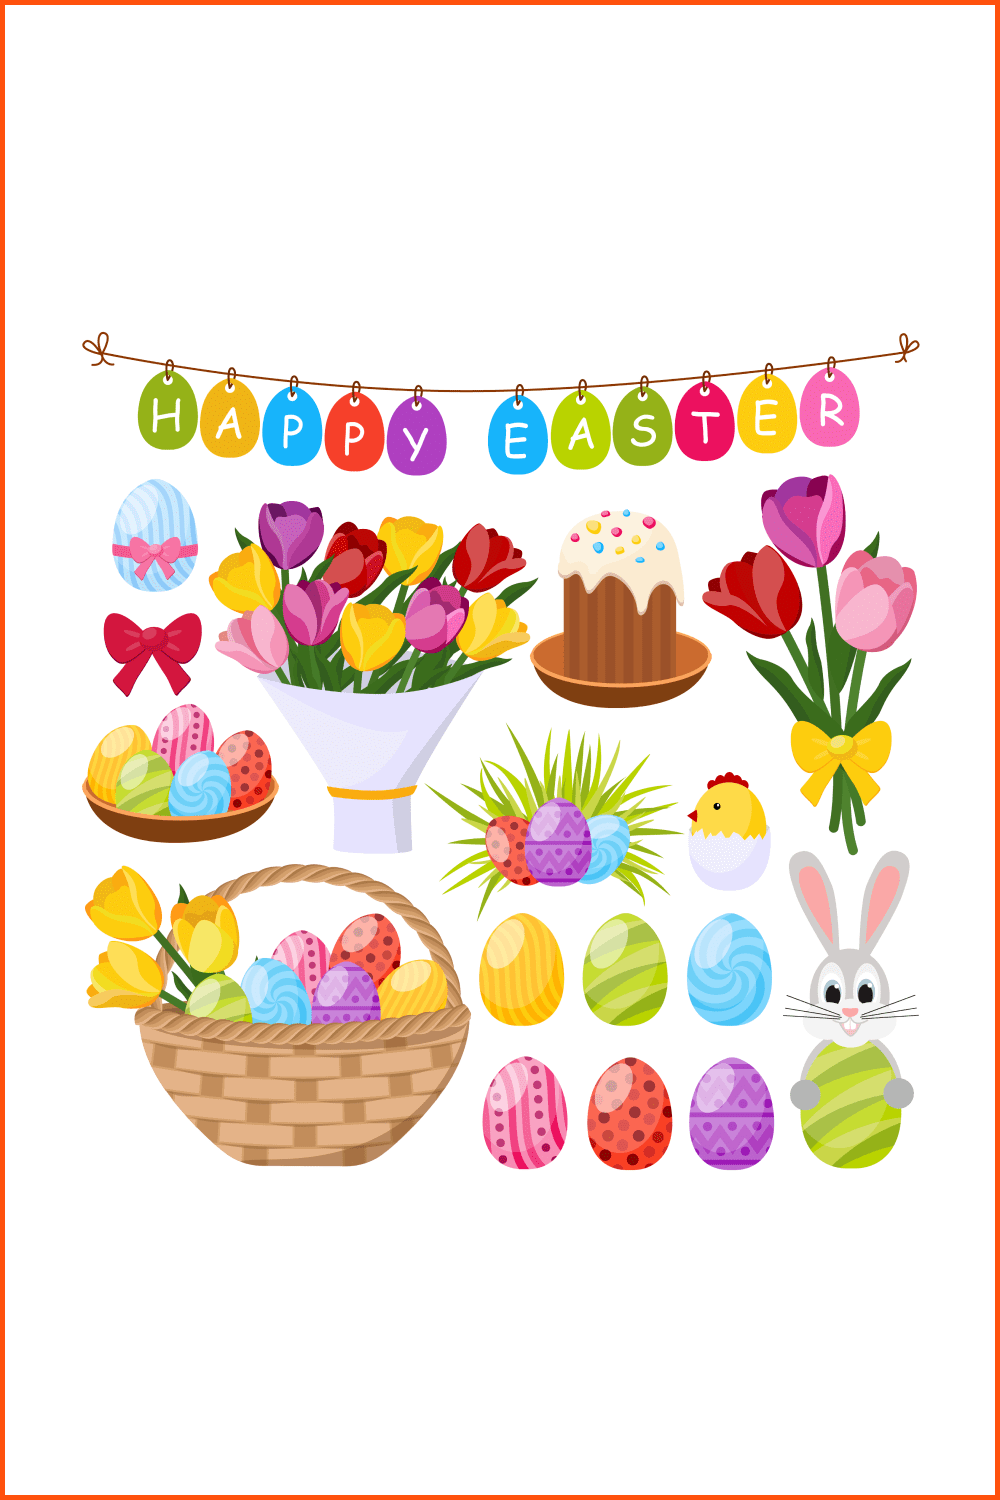 Set with colored eggs, hens, rabbits and flowers.